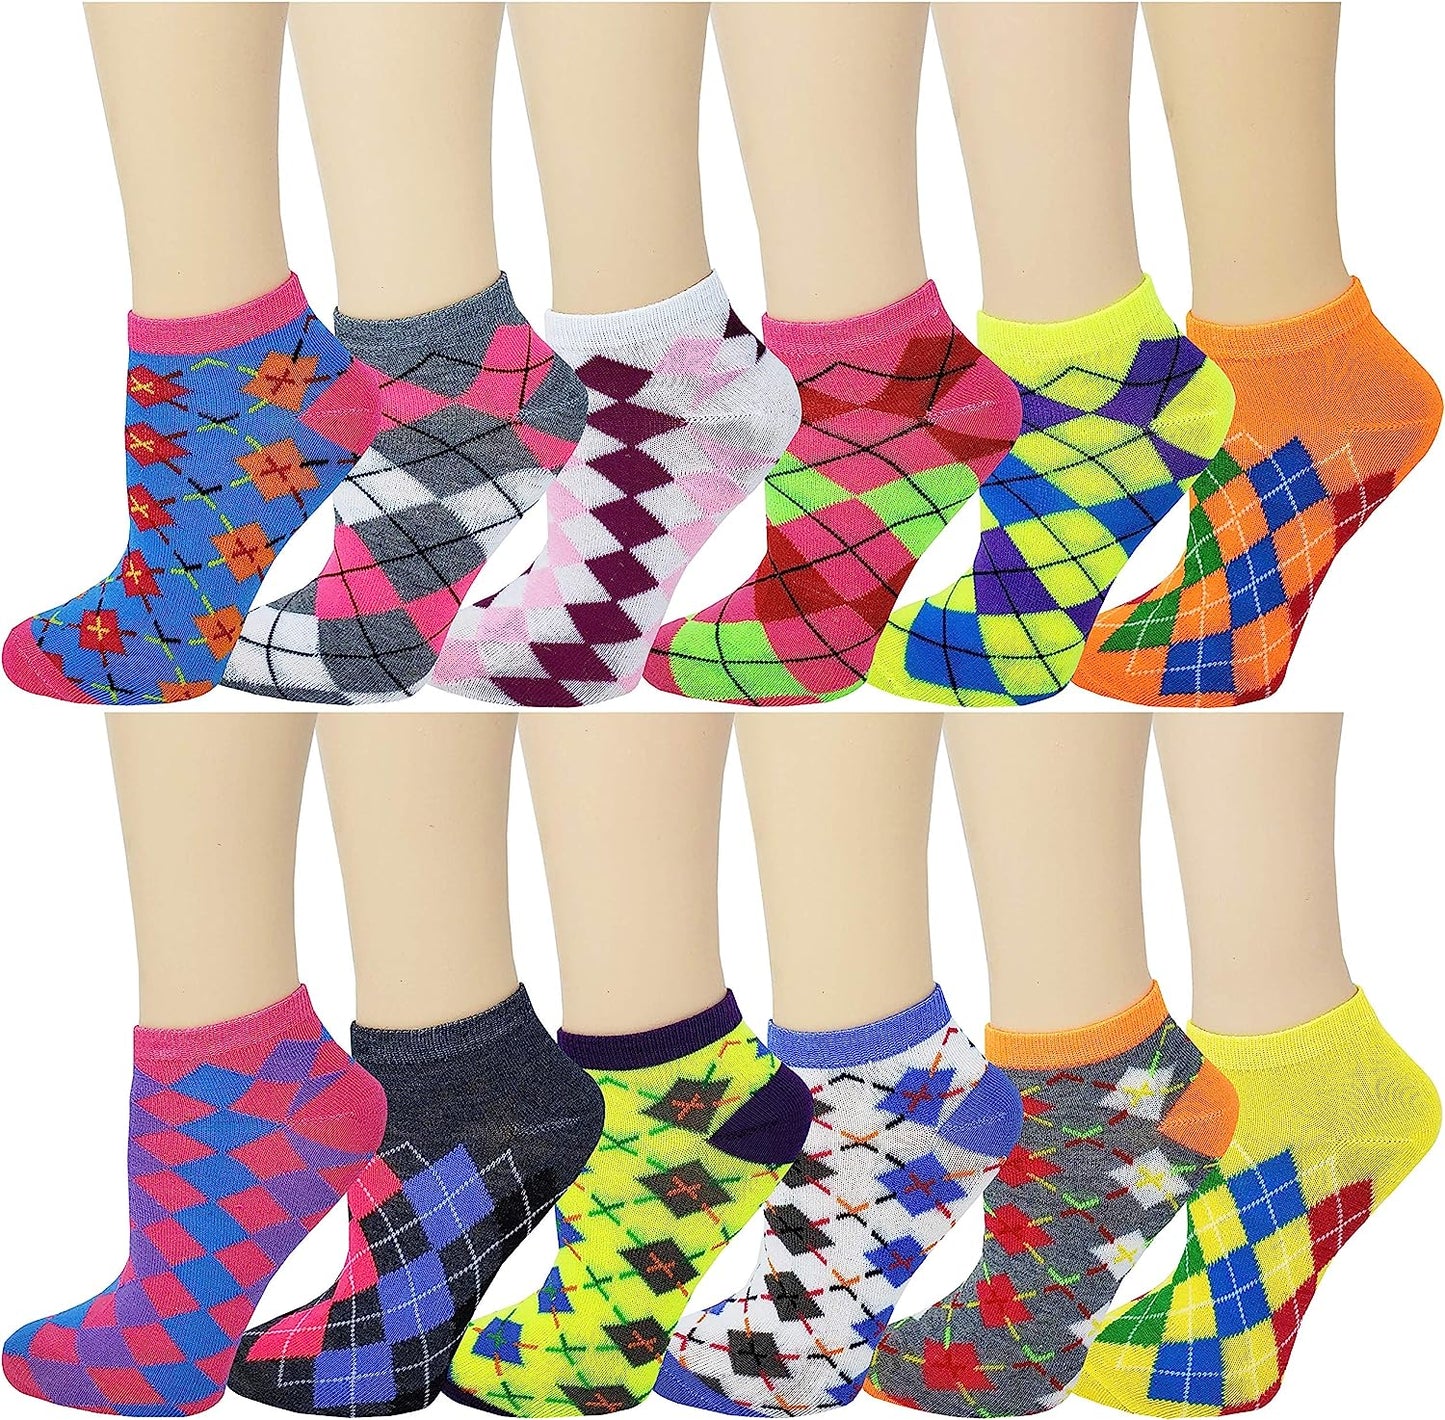 12 Pairs Women Low Aryle Neon Color Ankle Socks